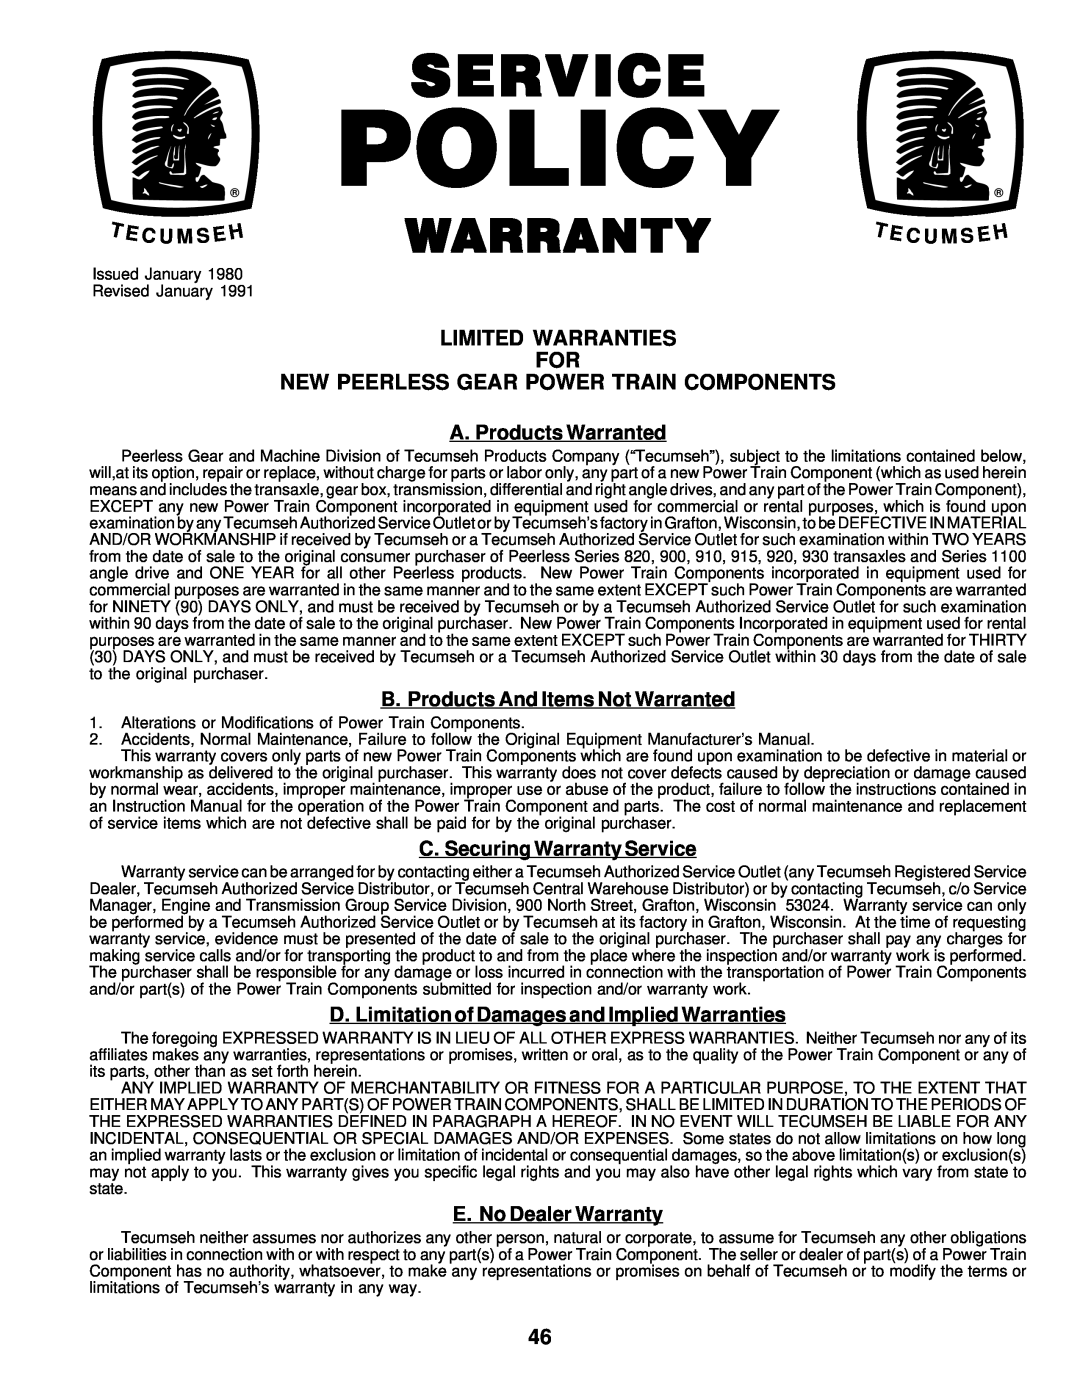 Poulan 178108 Warranty, Limited Warranties For New Peerless Gear Power Train Components, T E C U M S Eh, Policy, Service 